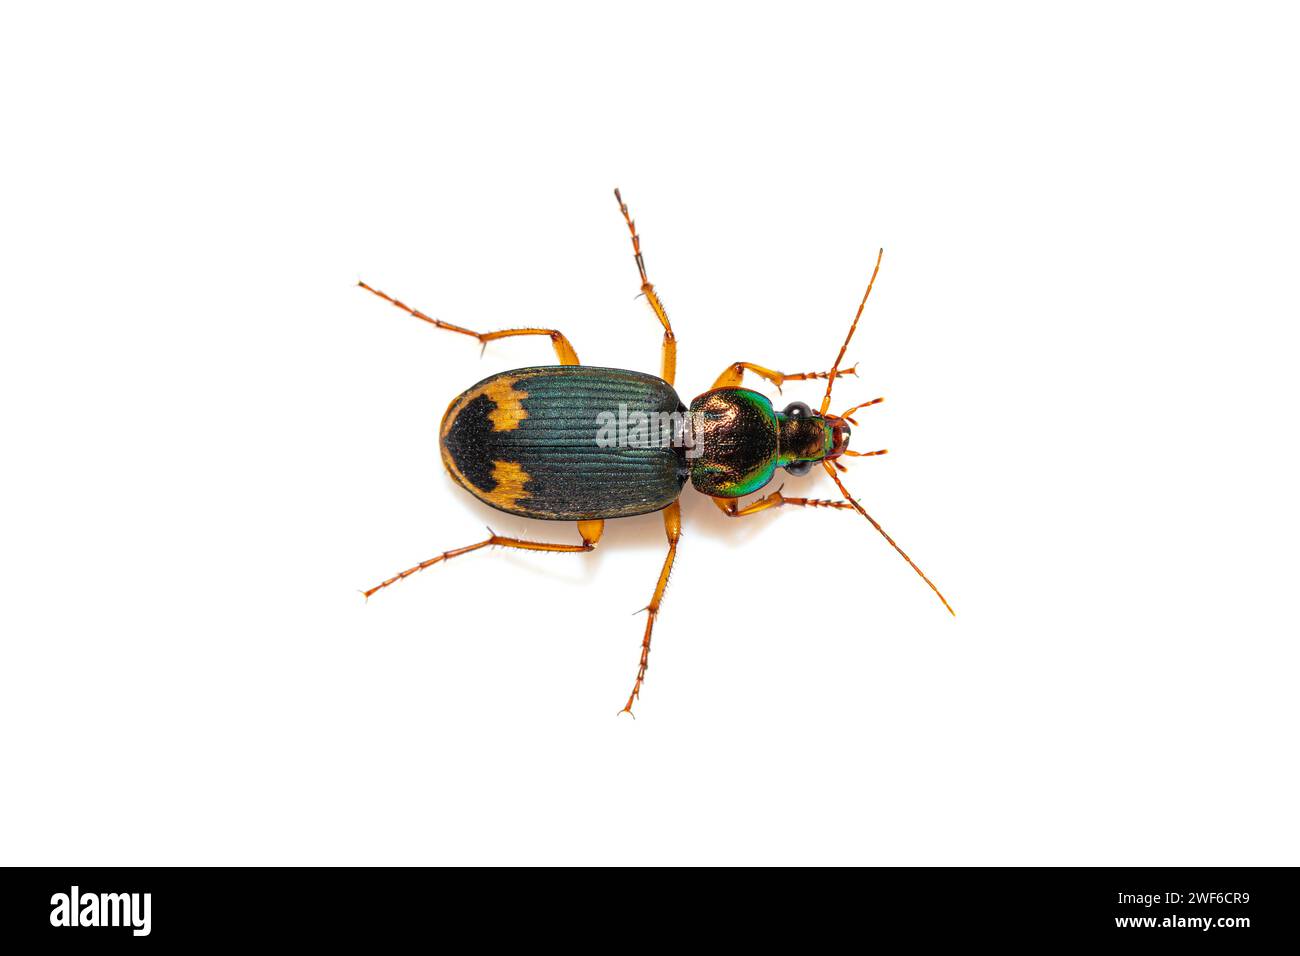 Beautiful Ground beetle (Chlaenius (Pachydinodes) sp) from Thailand, Southeast Asia Stock Photo